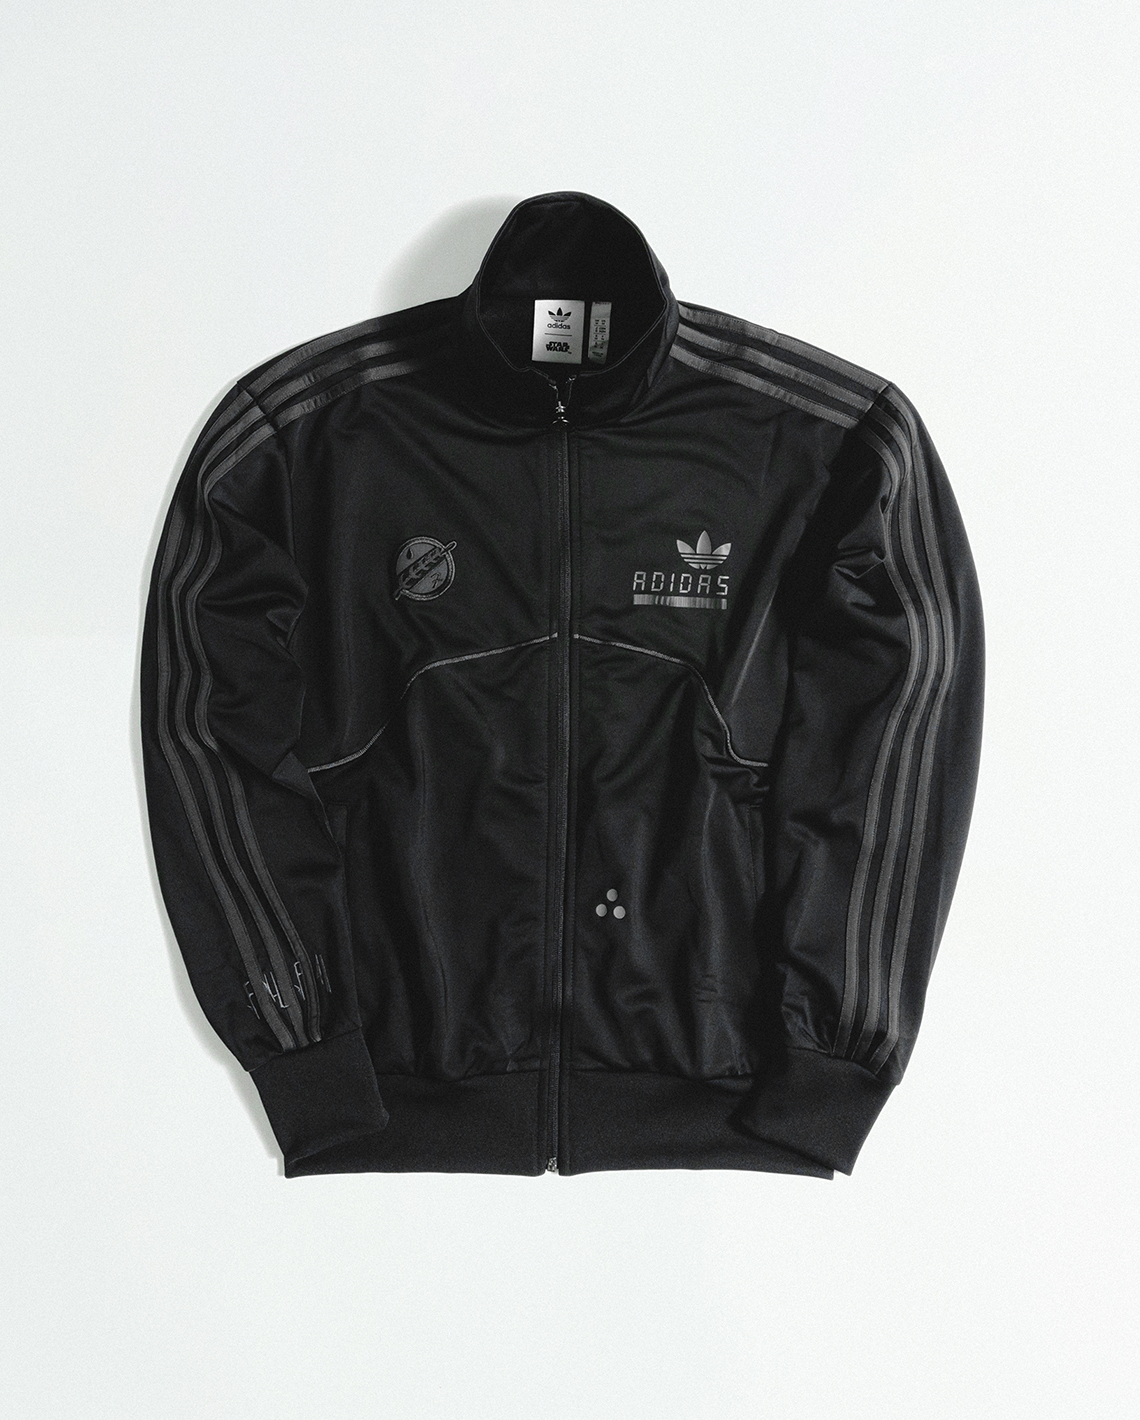 adidas apparel shopping guide march 2022 outfit 2 gallery 2